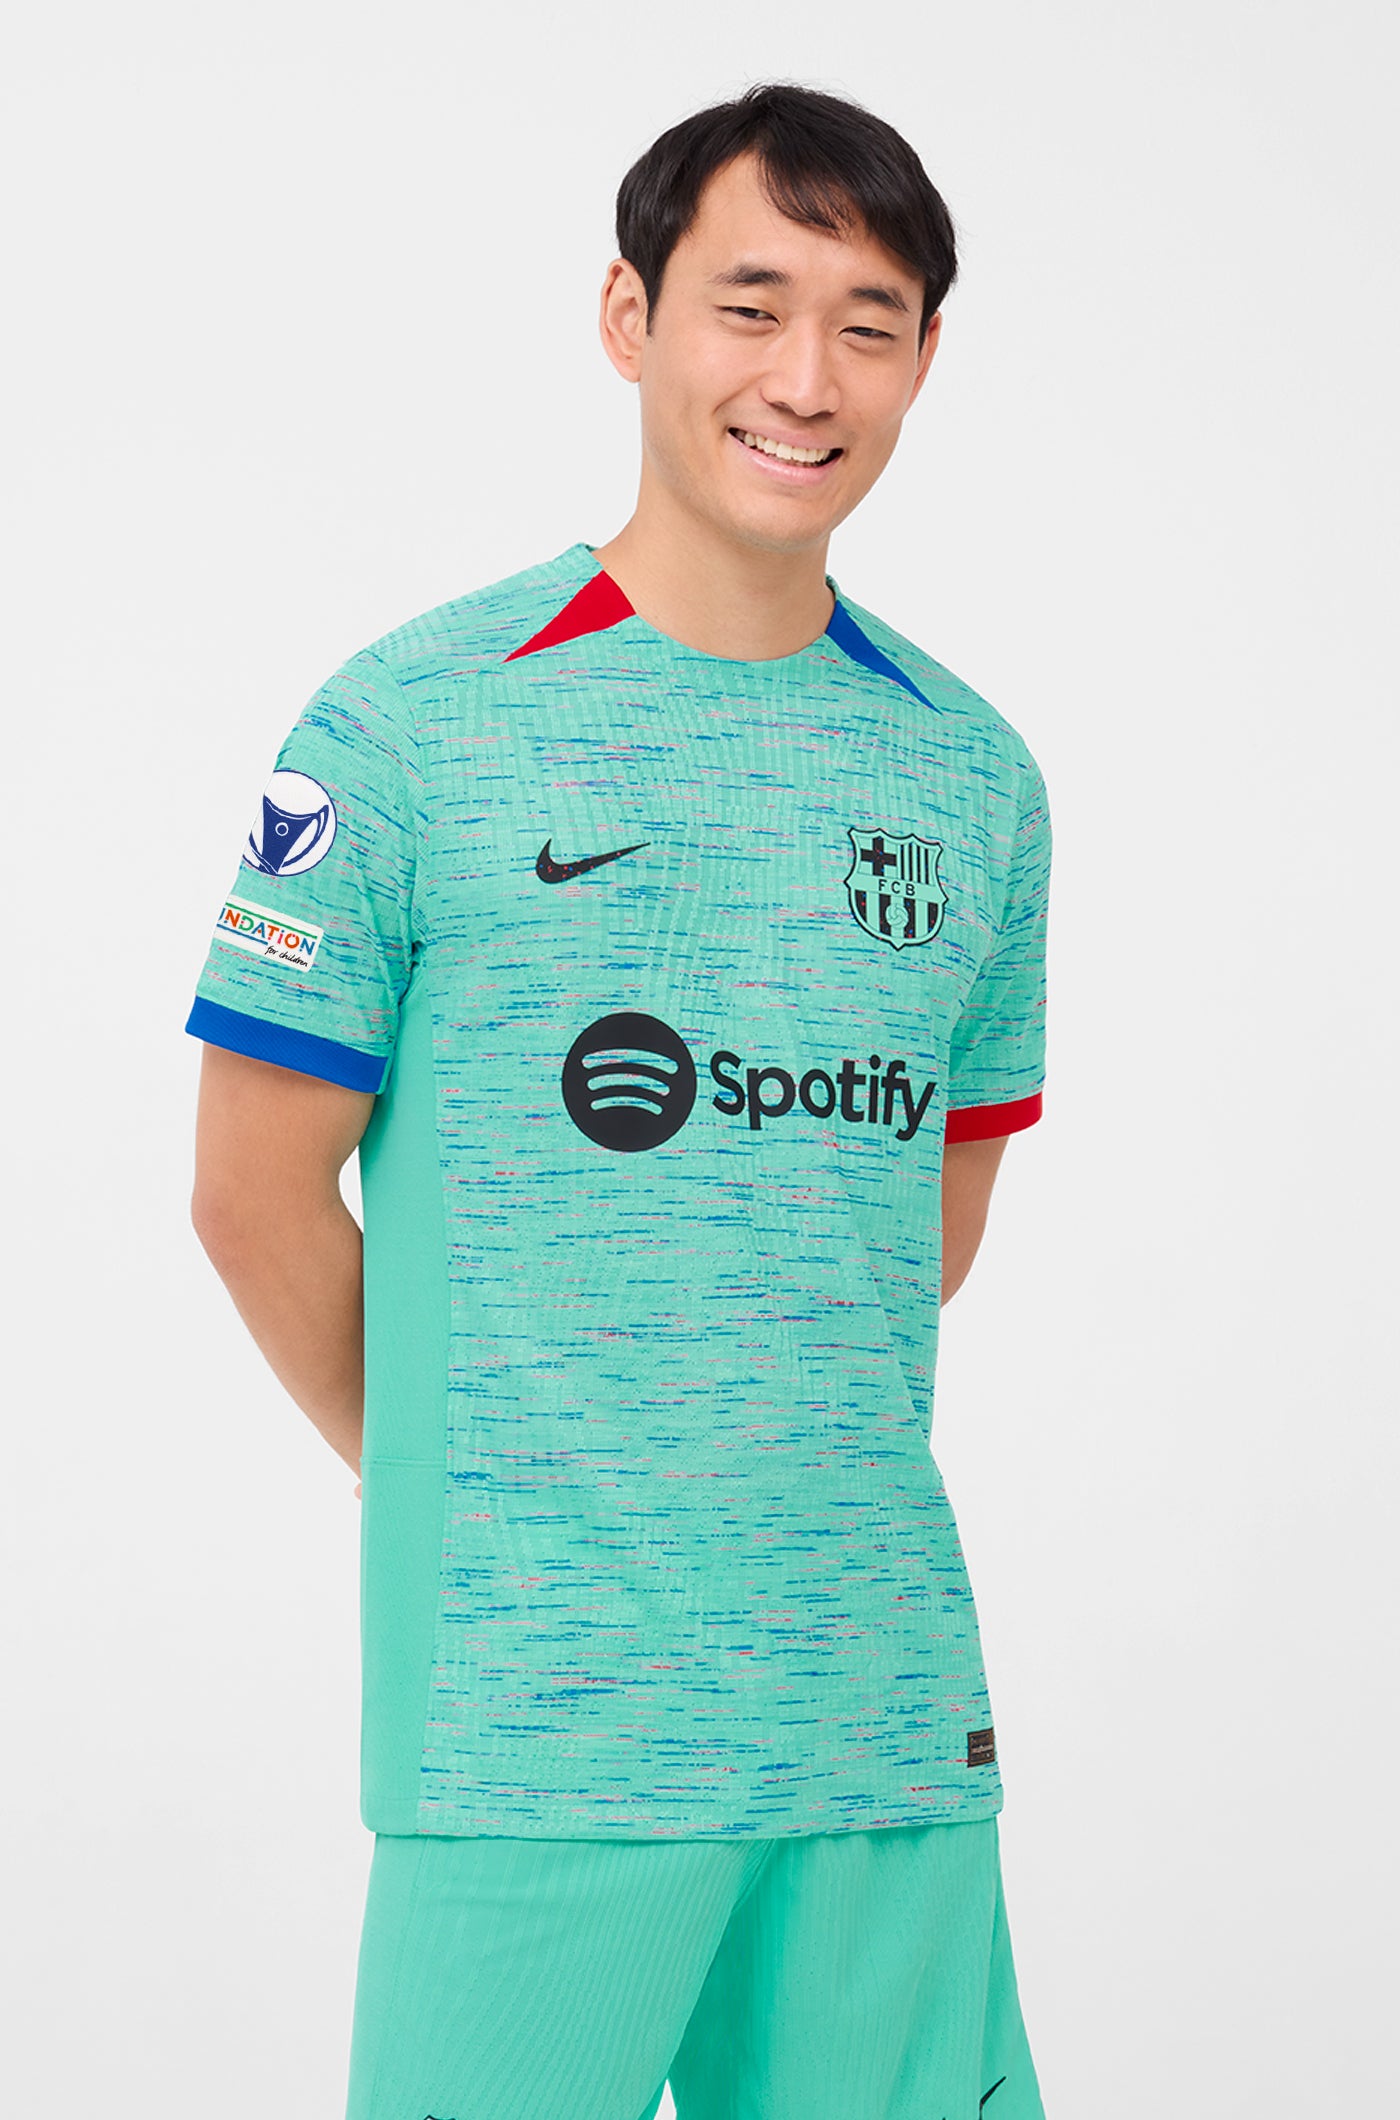 UWCL FC Barcelona third shirt 23/24 Player's Edition - PAREDES